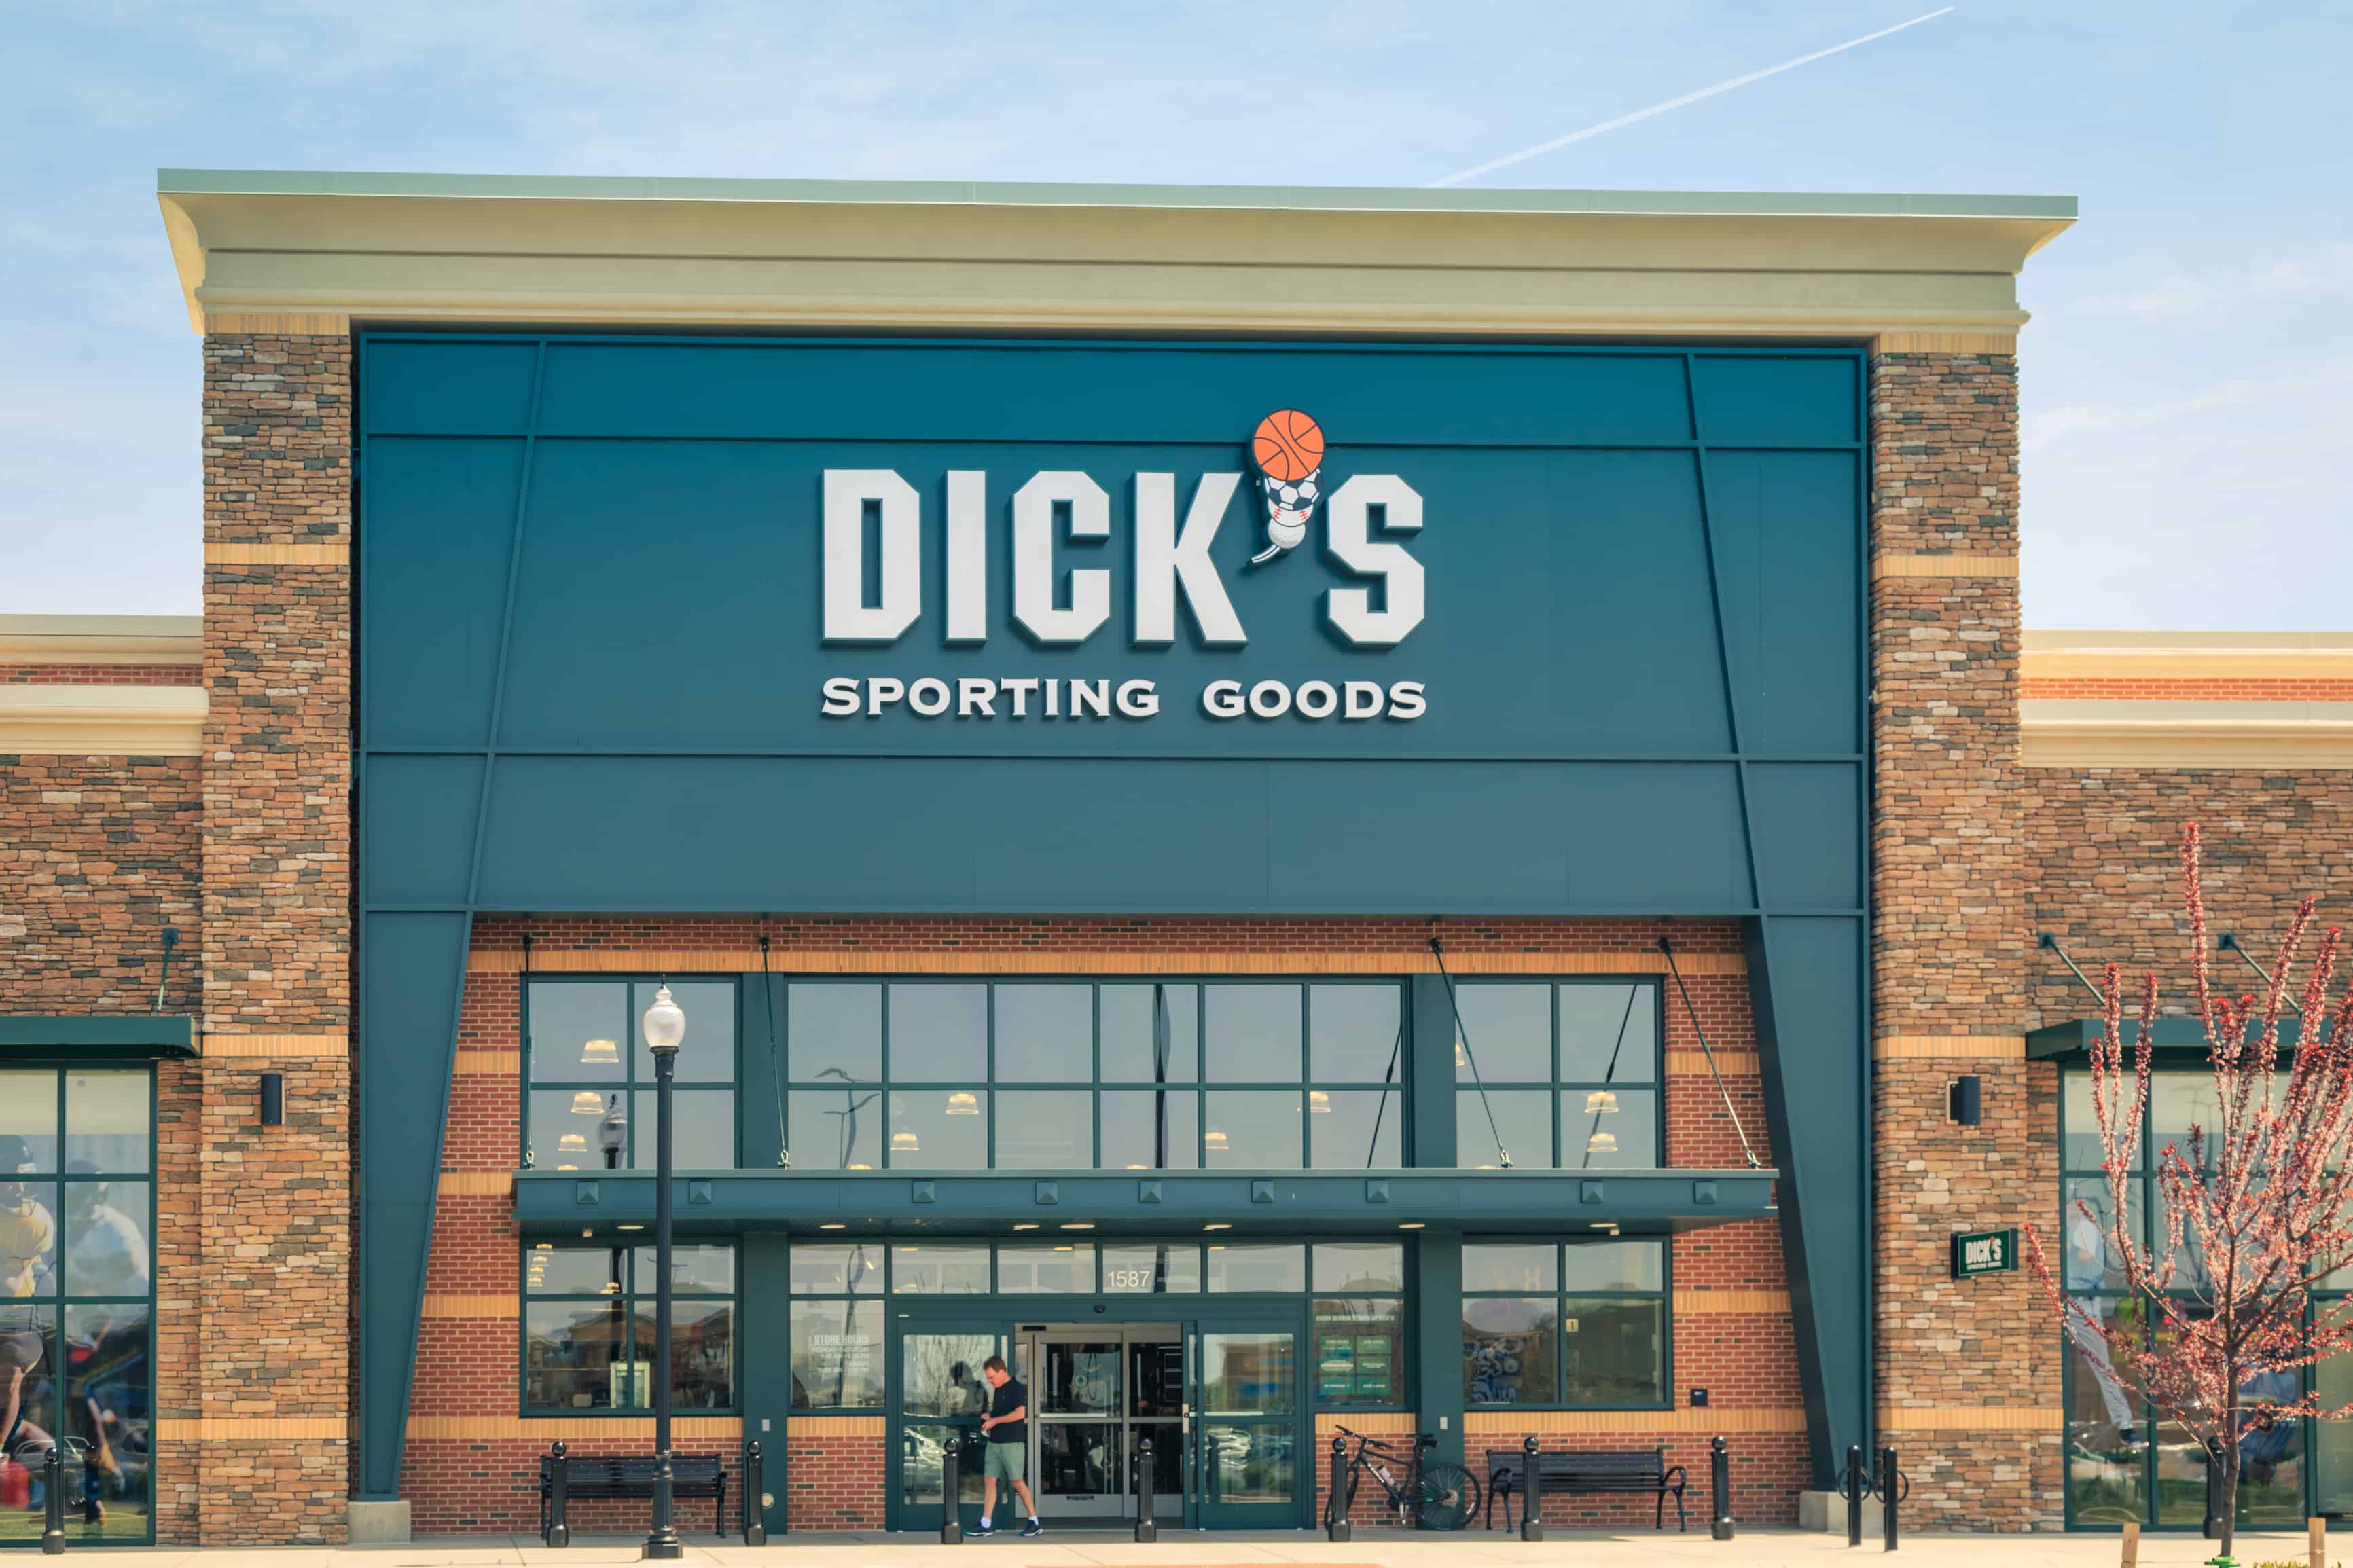 Dicks sporting goods history picture